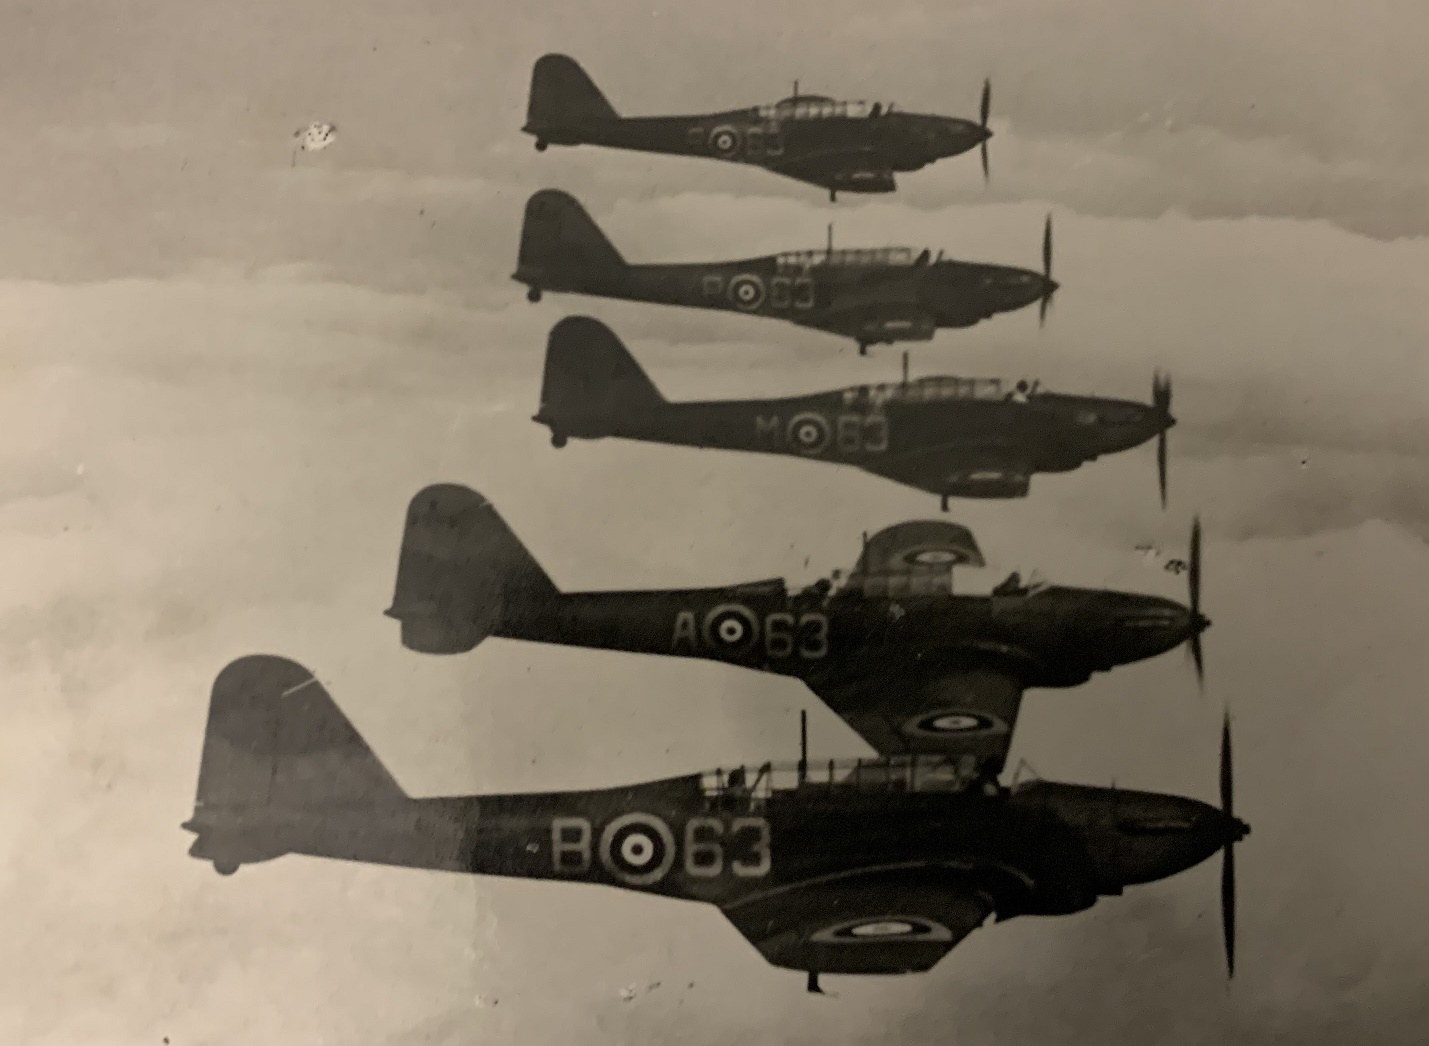 Five Battles of No 63 Sqn in line abreast between 1937 and late 1938.